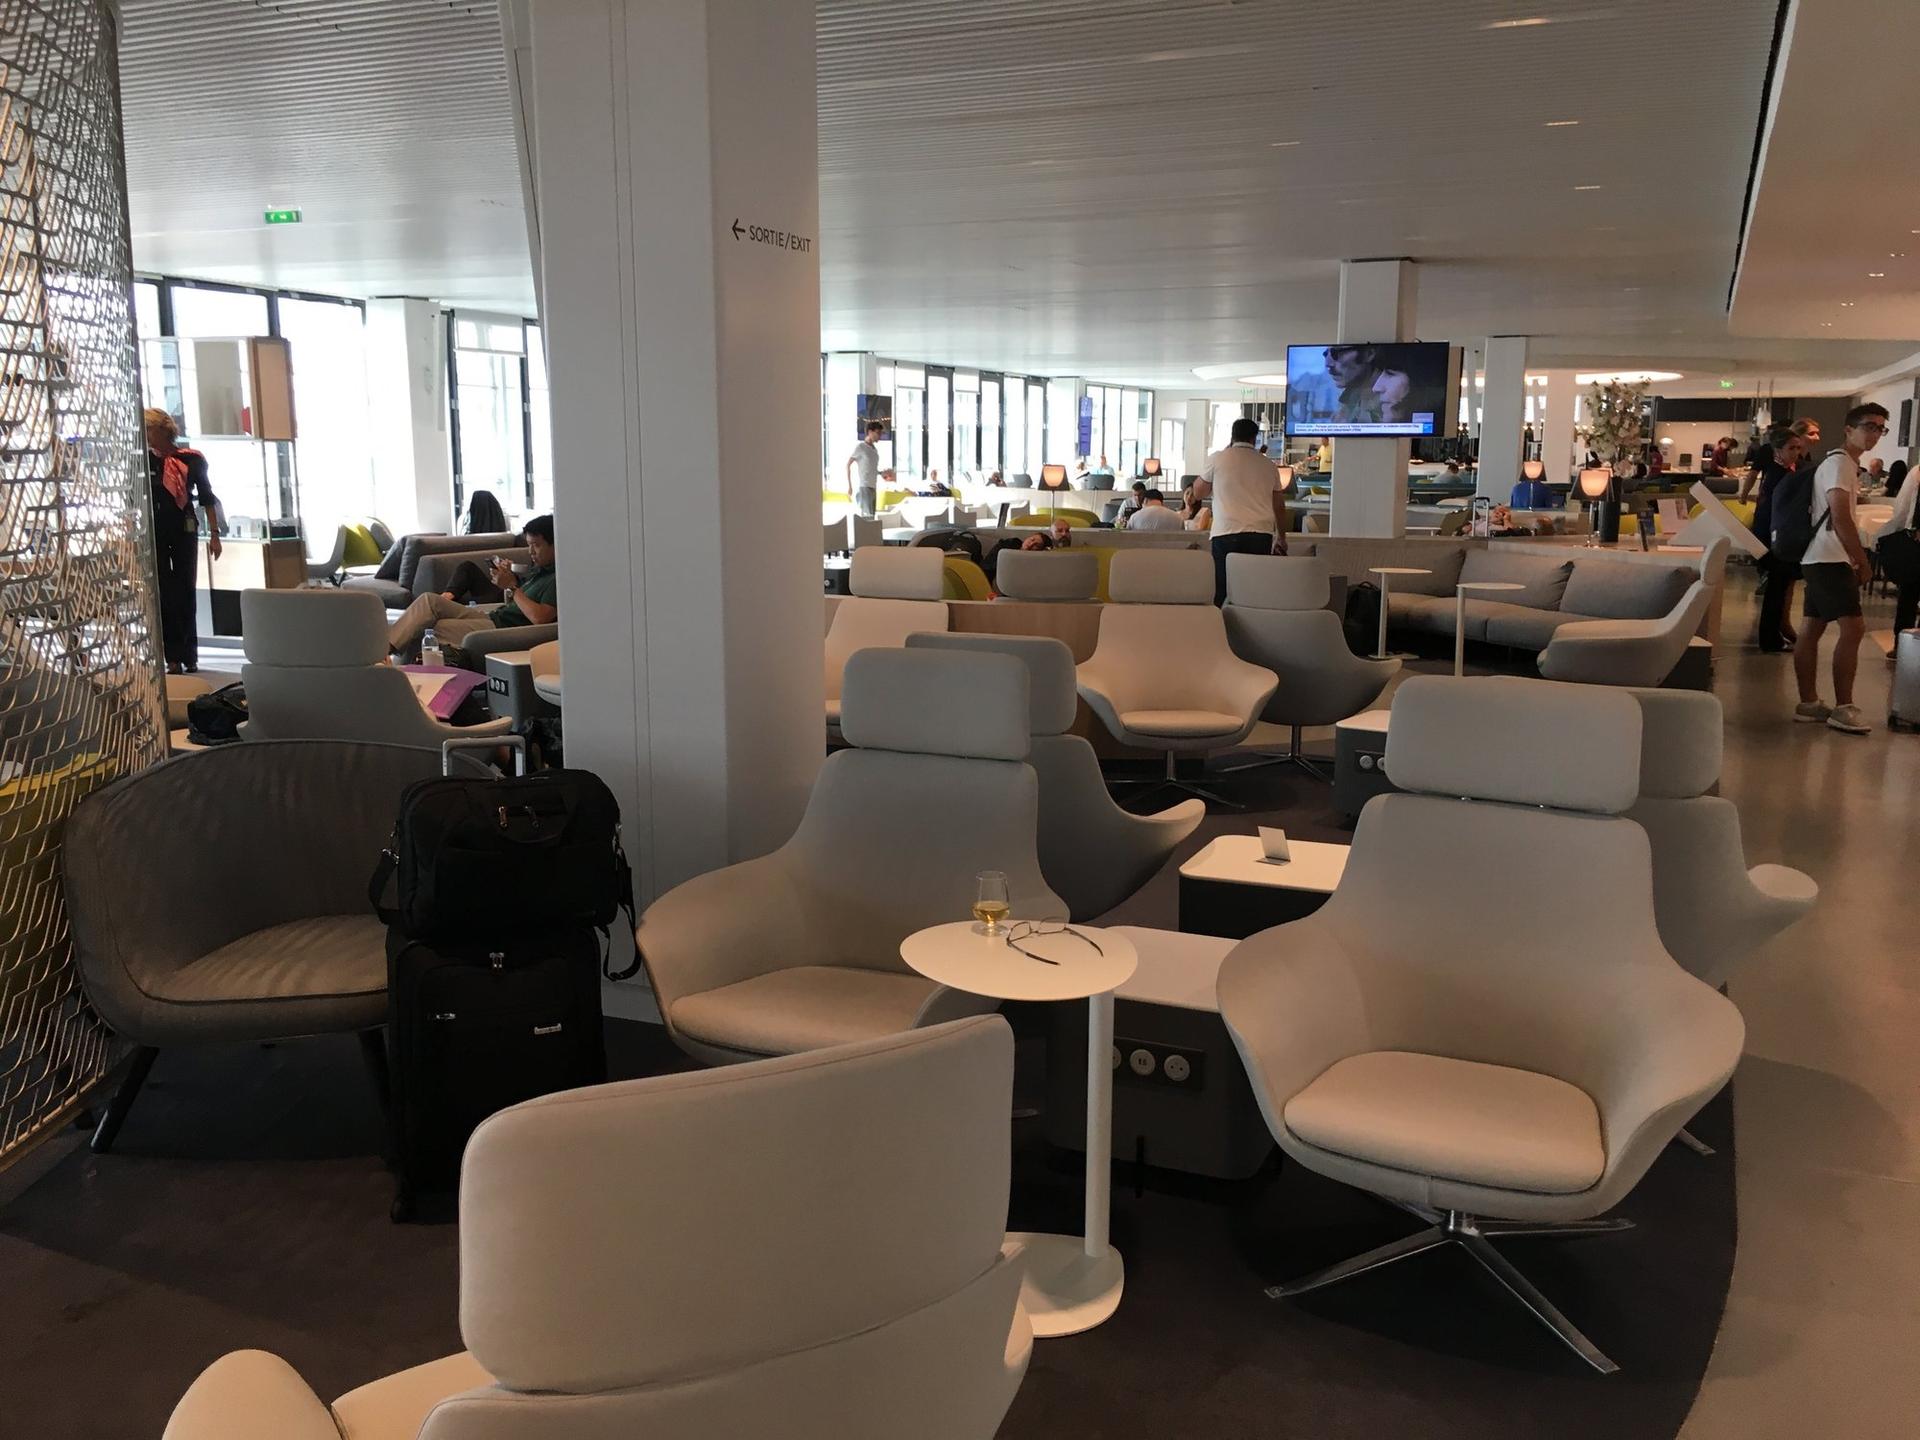 Air France Lounge (Concourse L) image 54 of 57